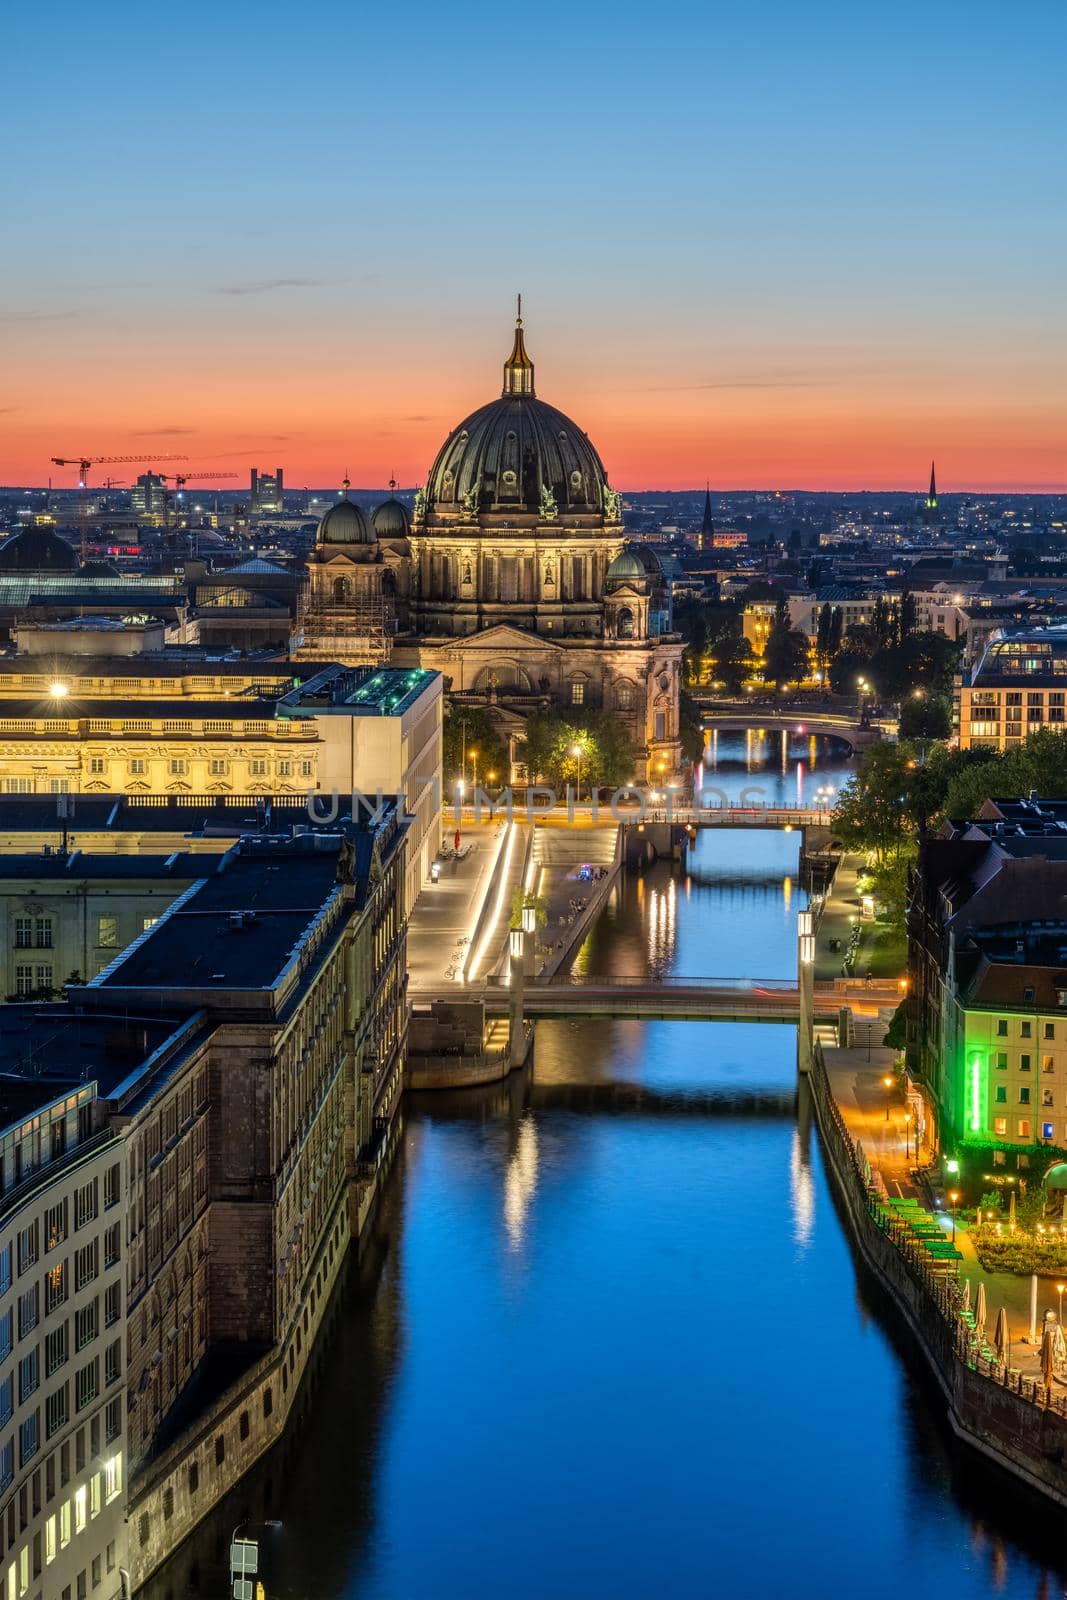 The river Spree in Berlin at night by elxeneize